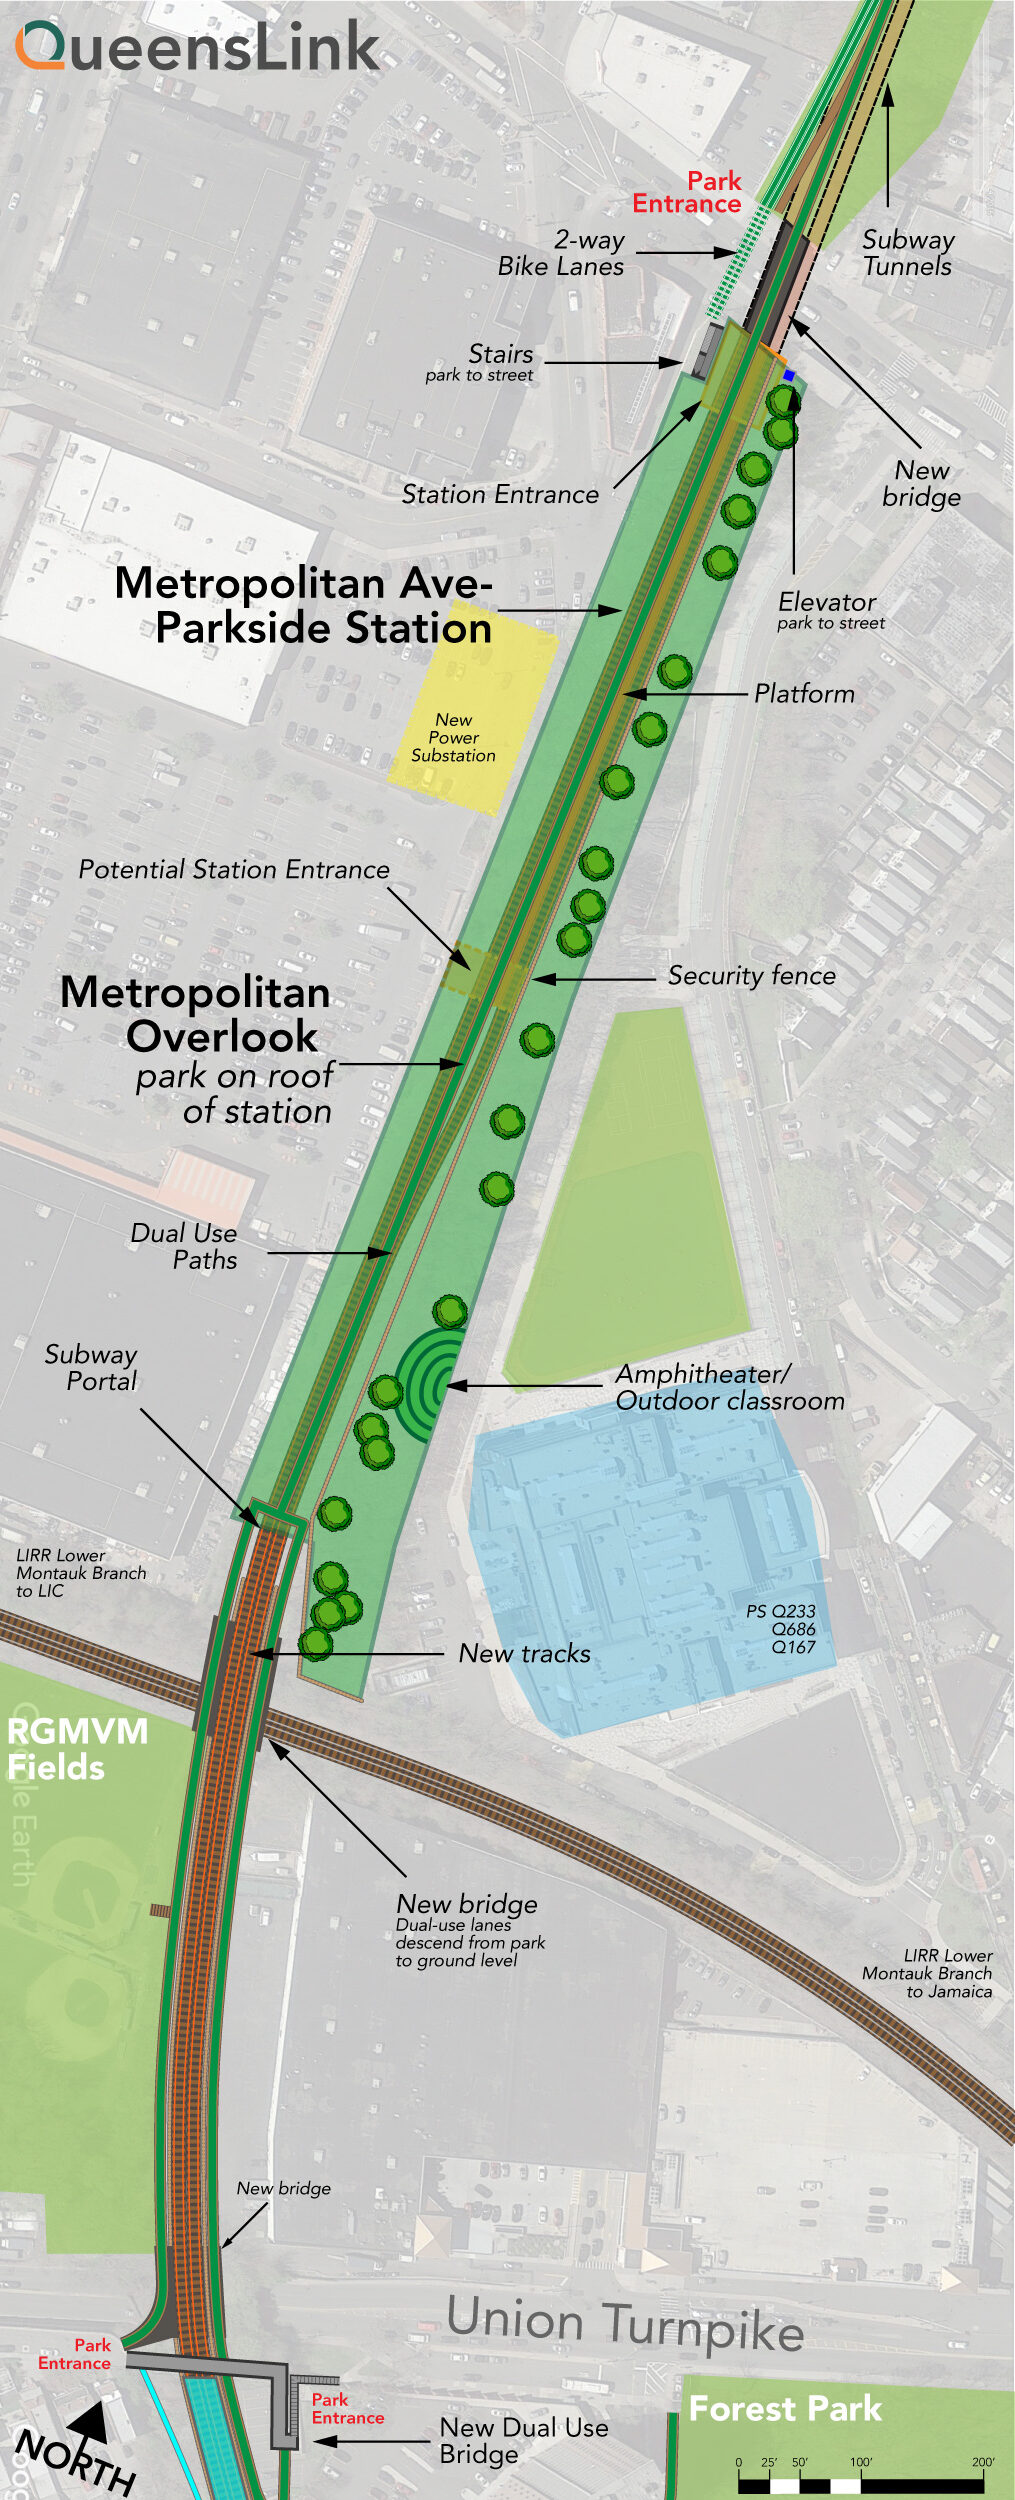 Site plan for the Metropolitan Ave Station and Overlook Park.